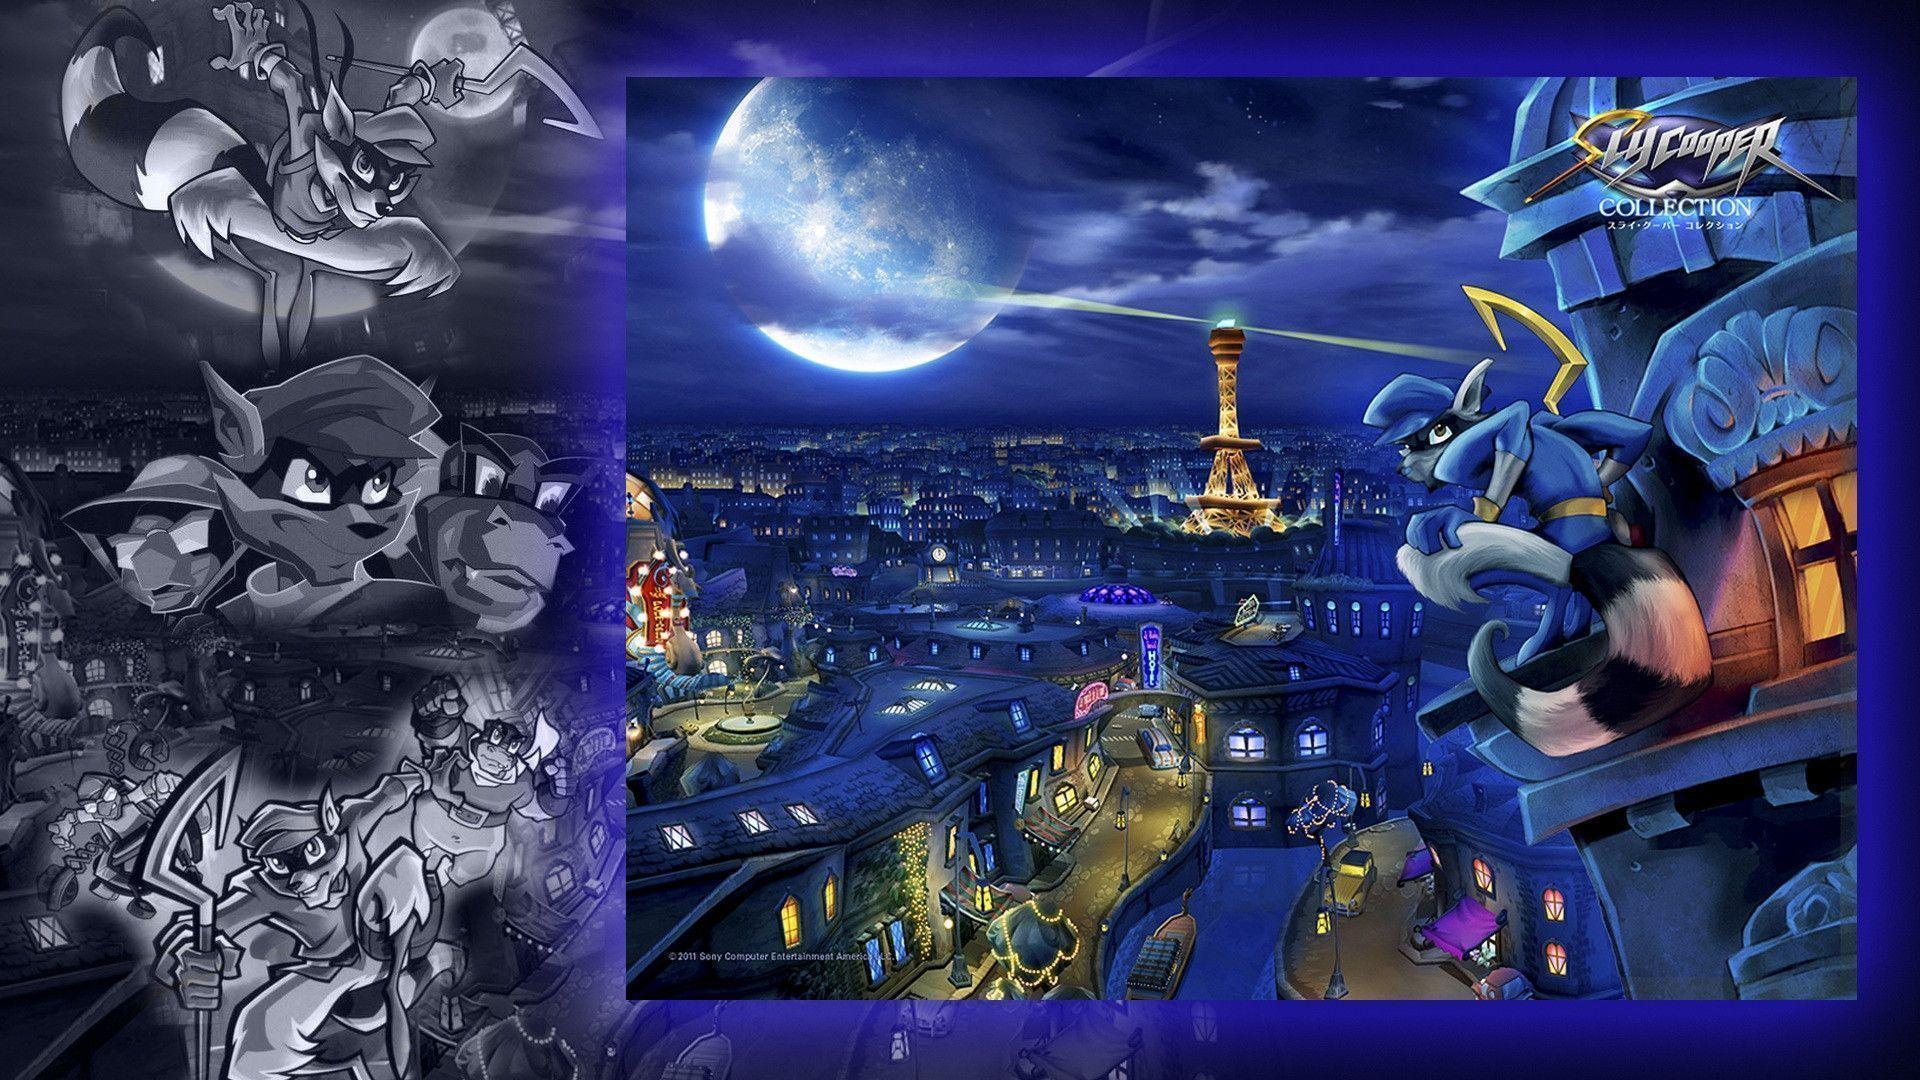 Sly Cooper Thieves in Time Wallpapers